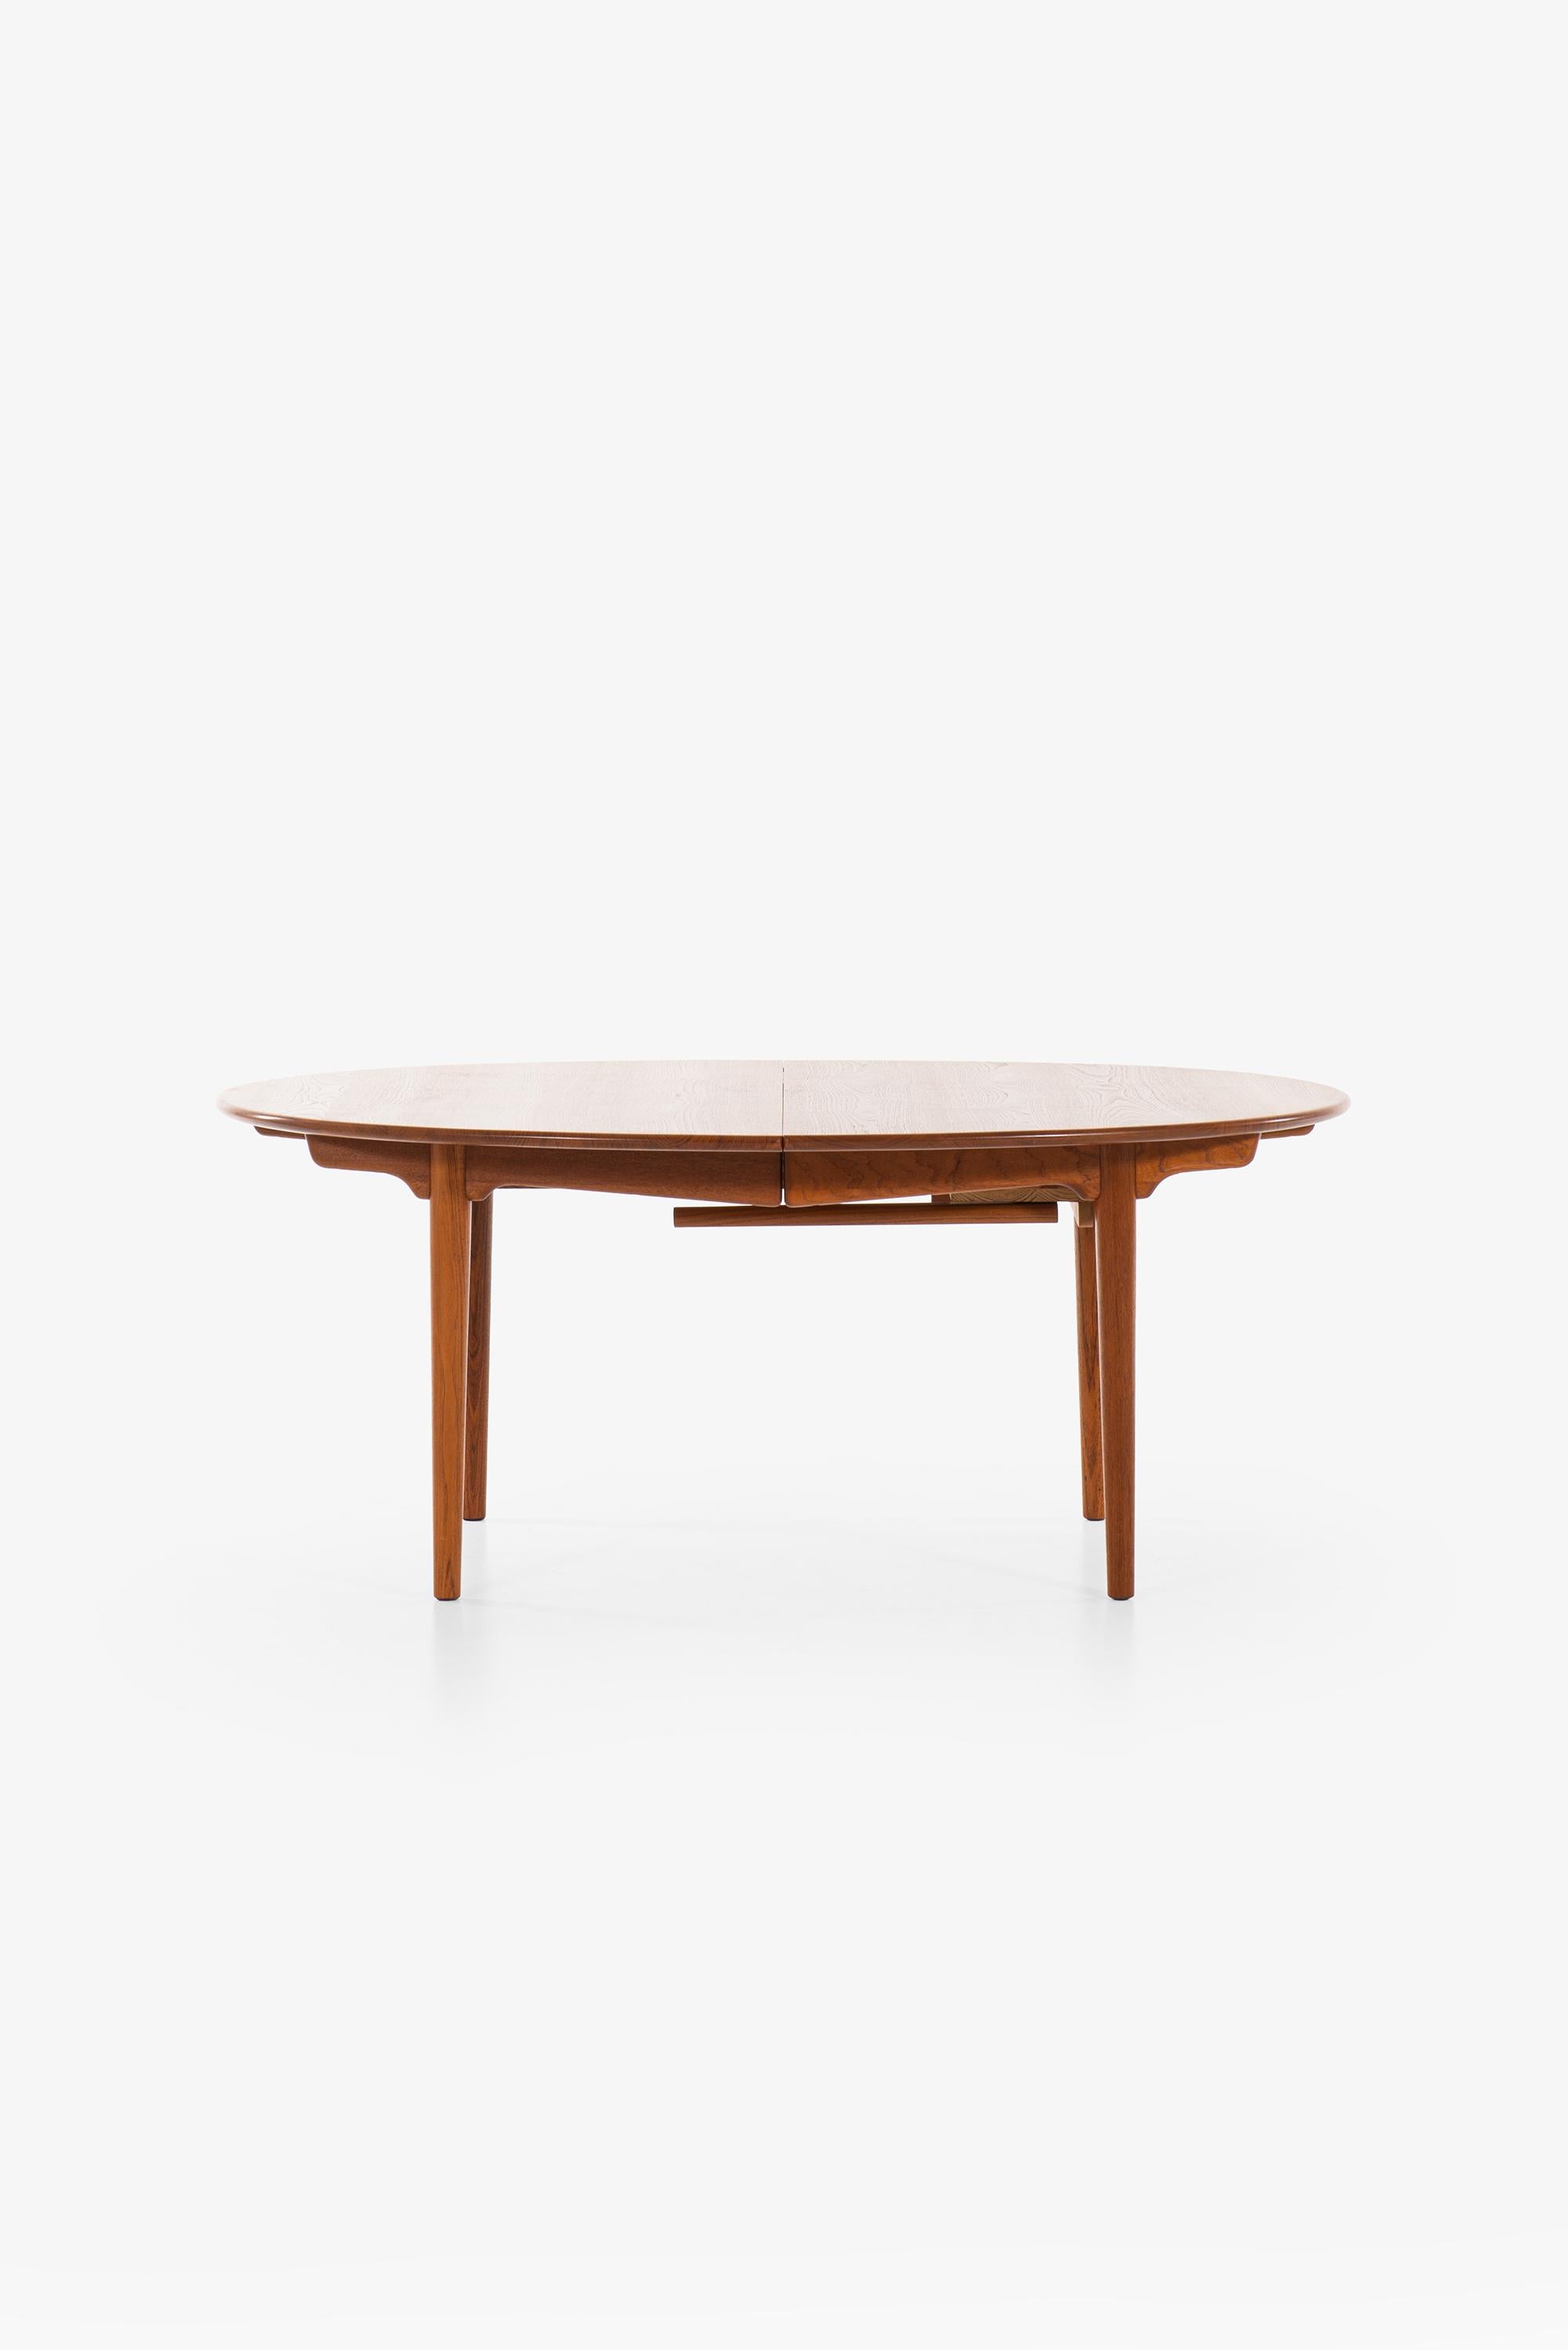 Very rare and large dining table in solid teak model JH-567 designed by Hans Wegner. Produced by cabinetmaker Johannes Hansen in Denmark.